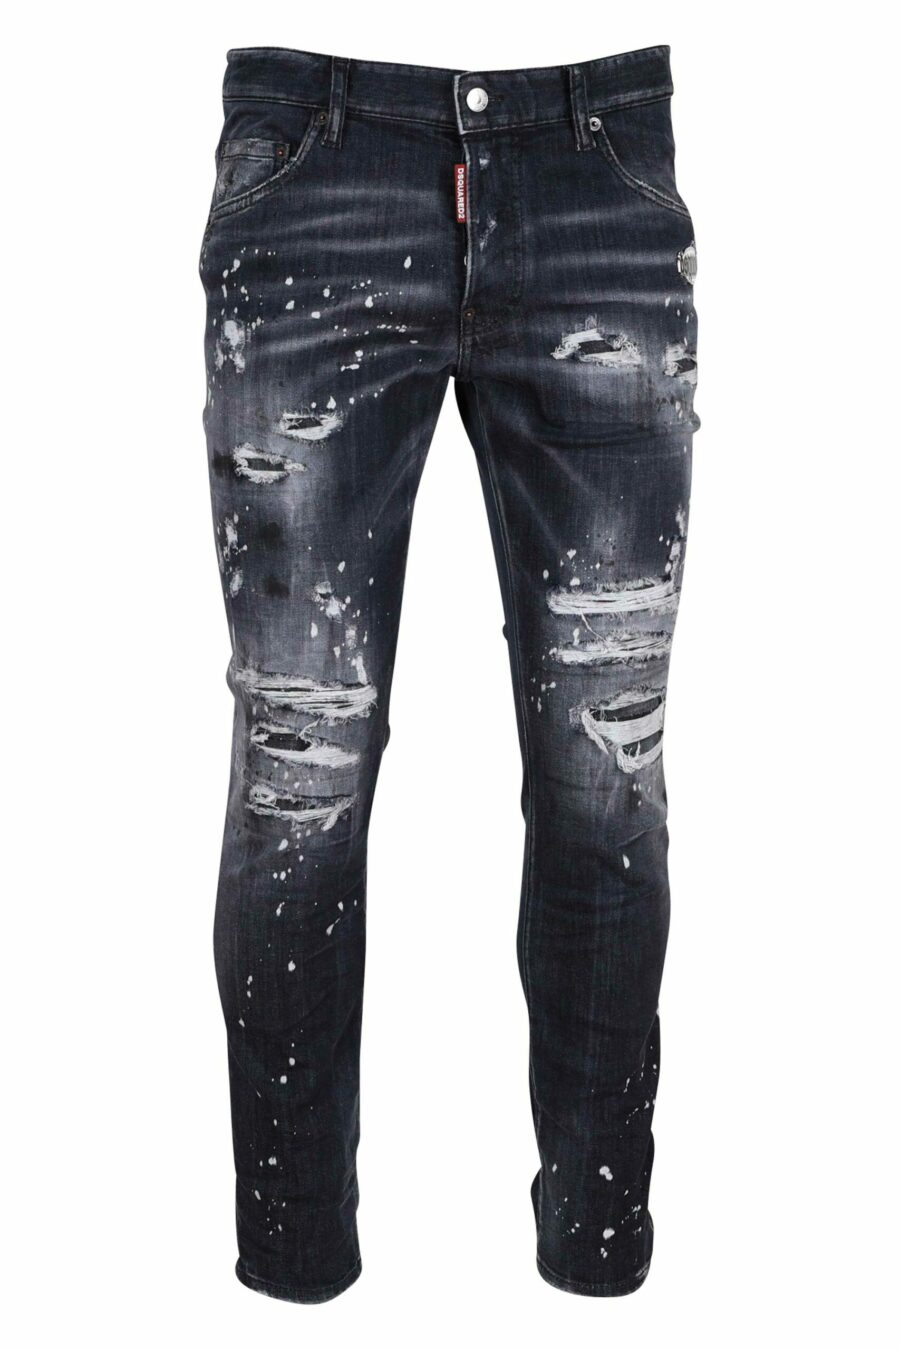 Black "skater jean" jeans with rips - 8054148284084 scaled